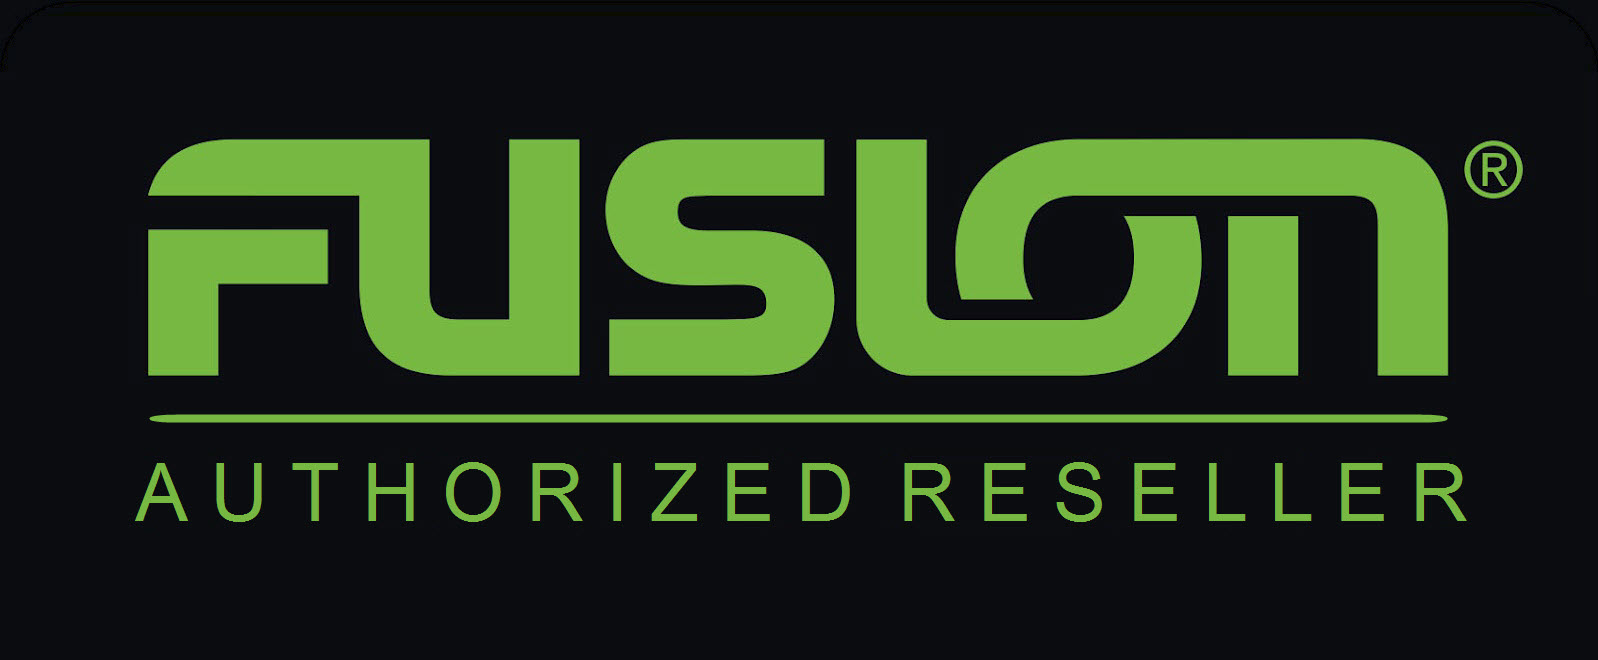 FUSION authorized reseller